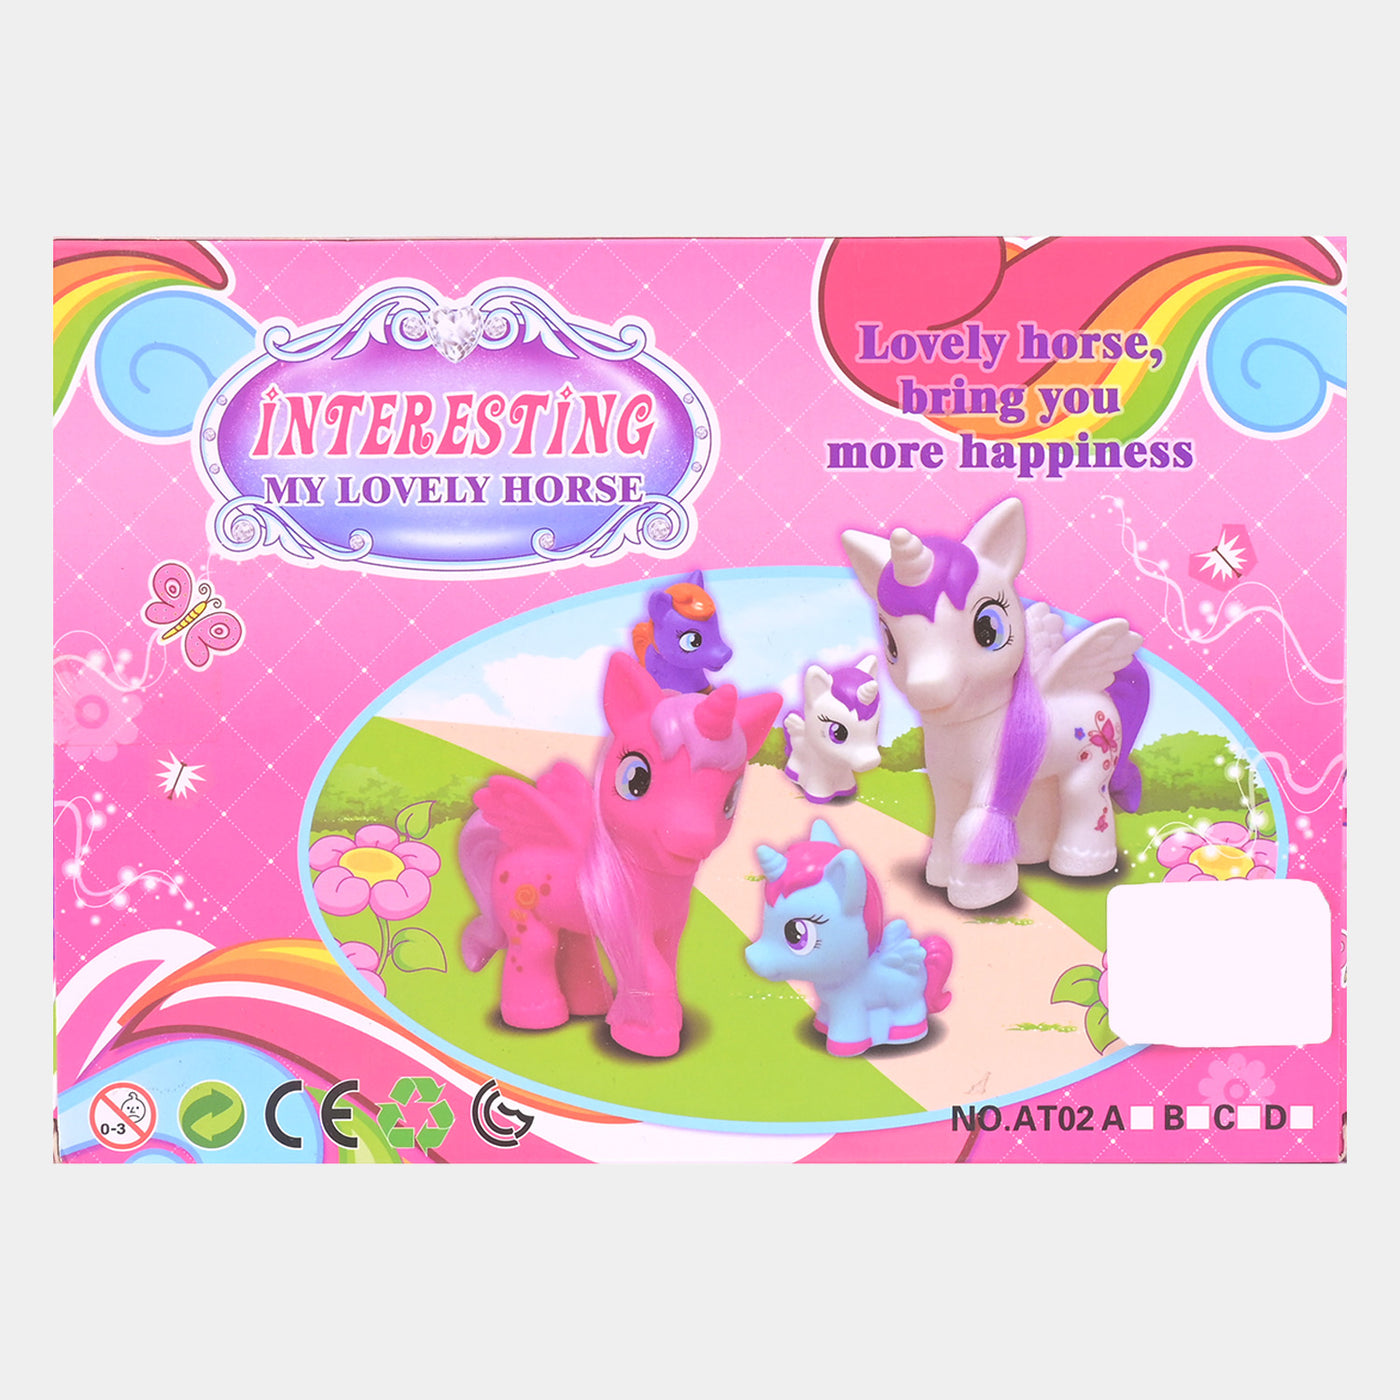 Character Toy Play Set | Pink